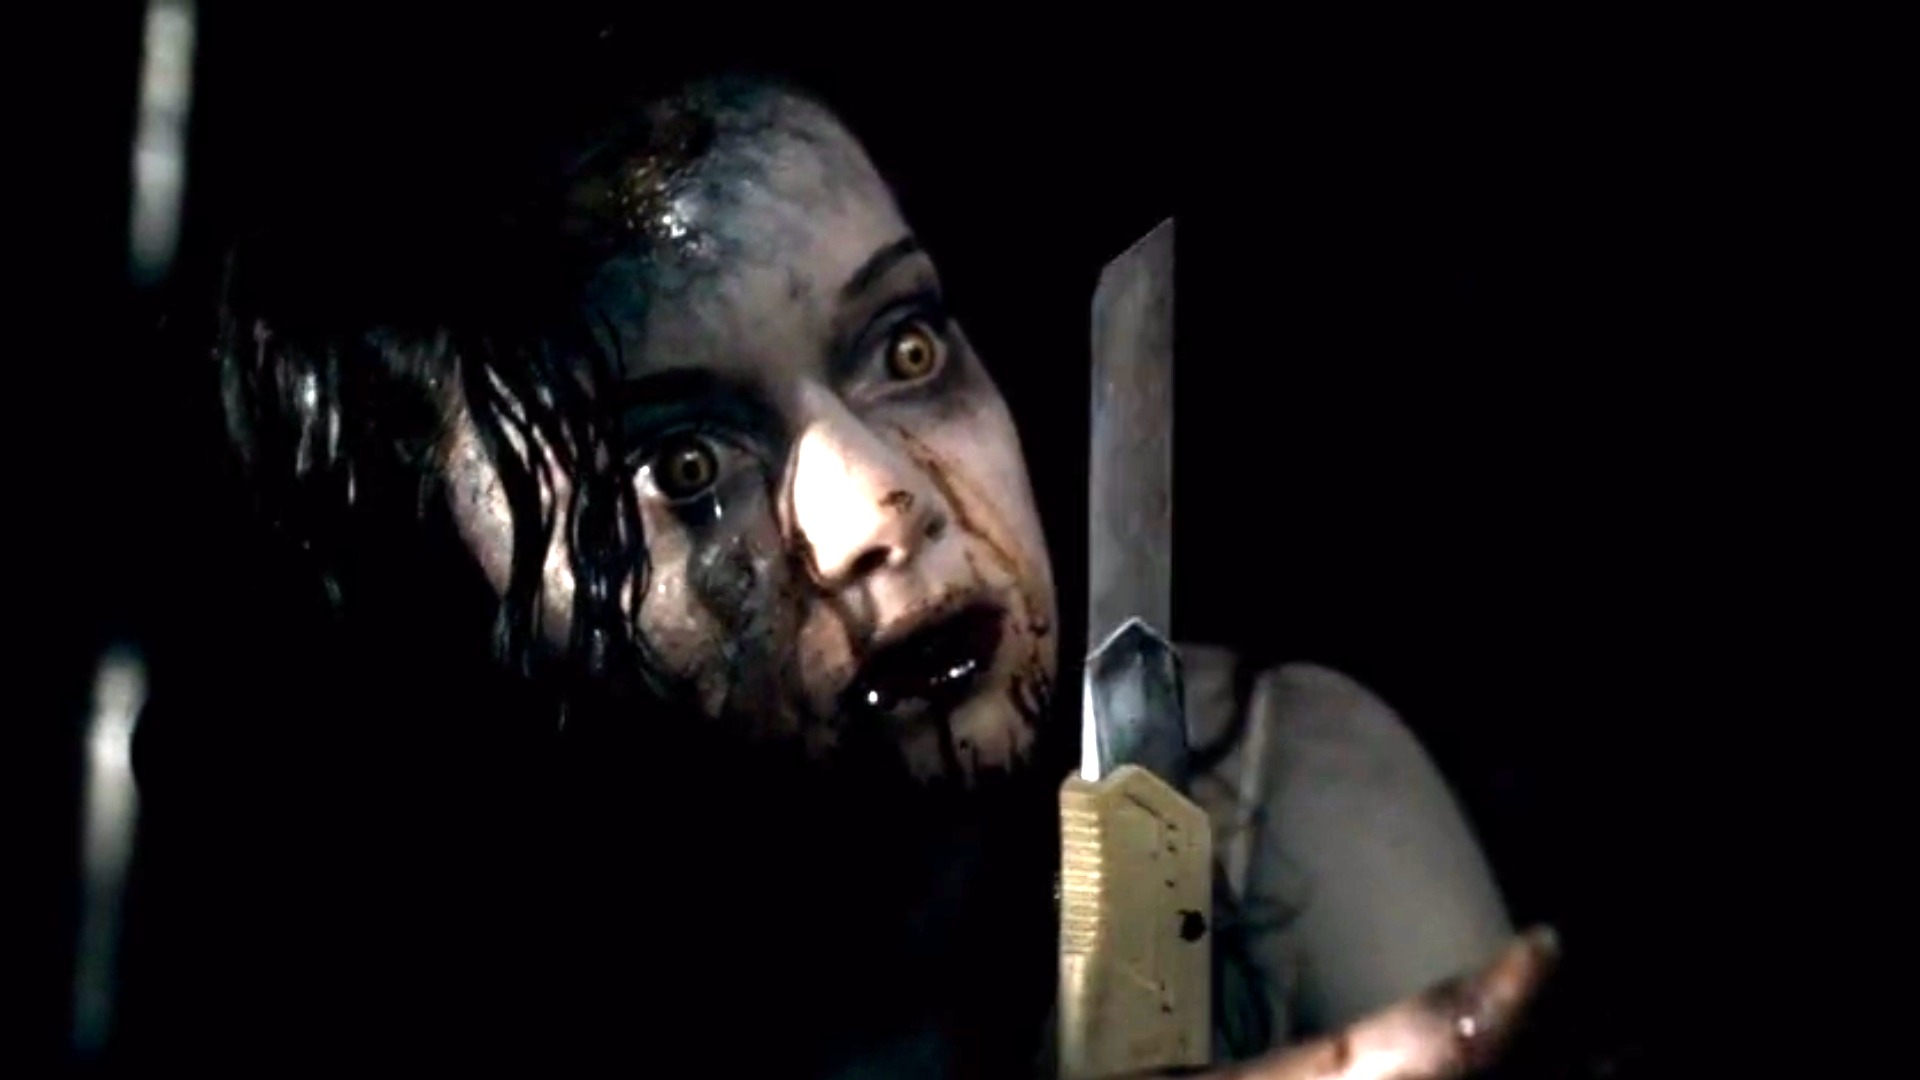 All of the Evil Dead Movies and Series, Ranked According to Rotten Tomatoes